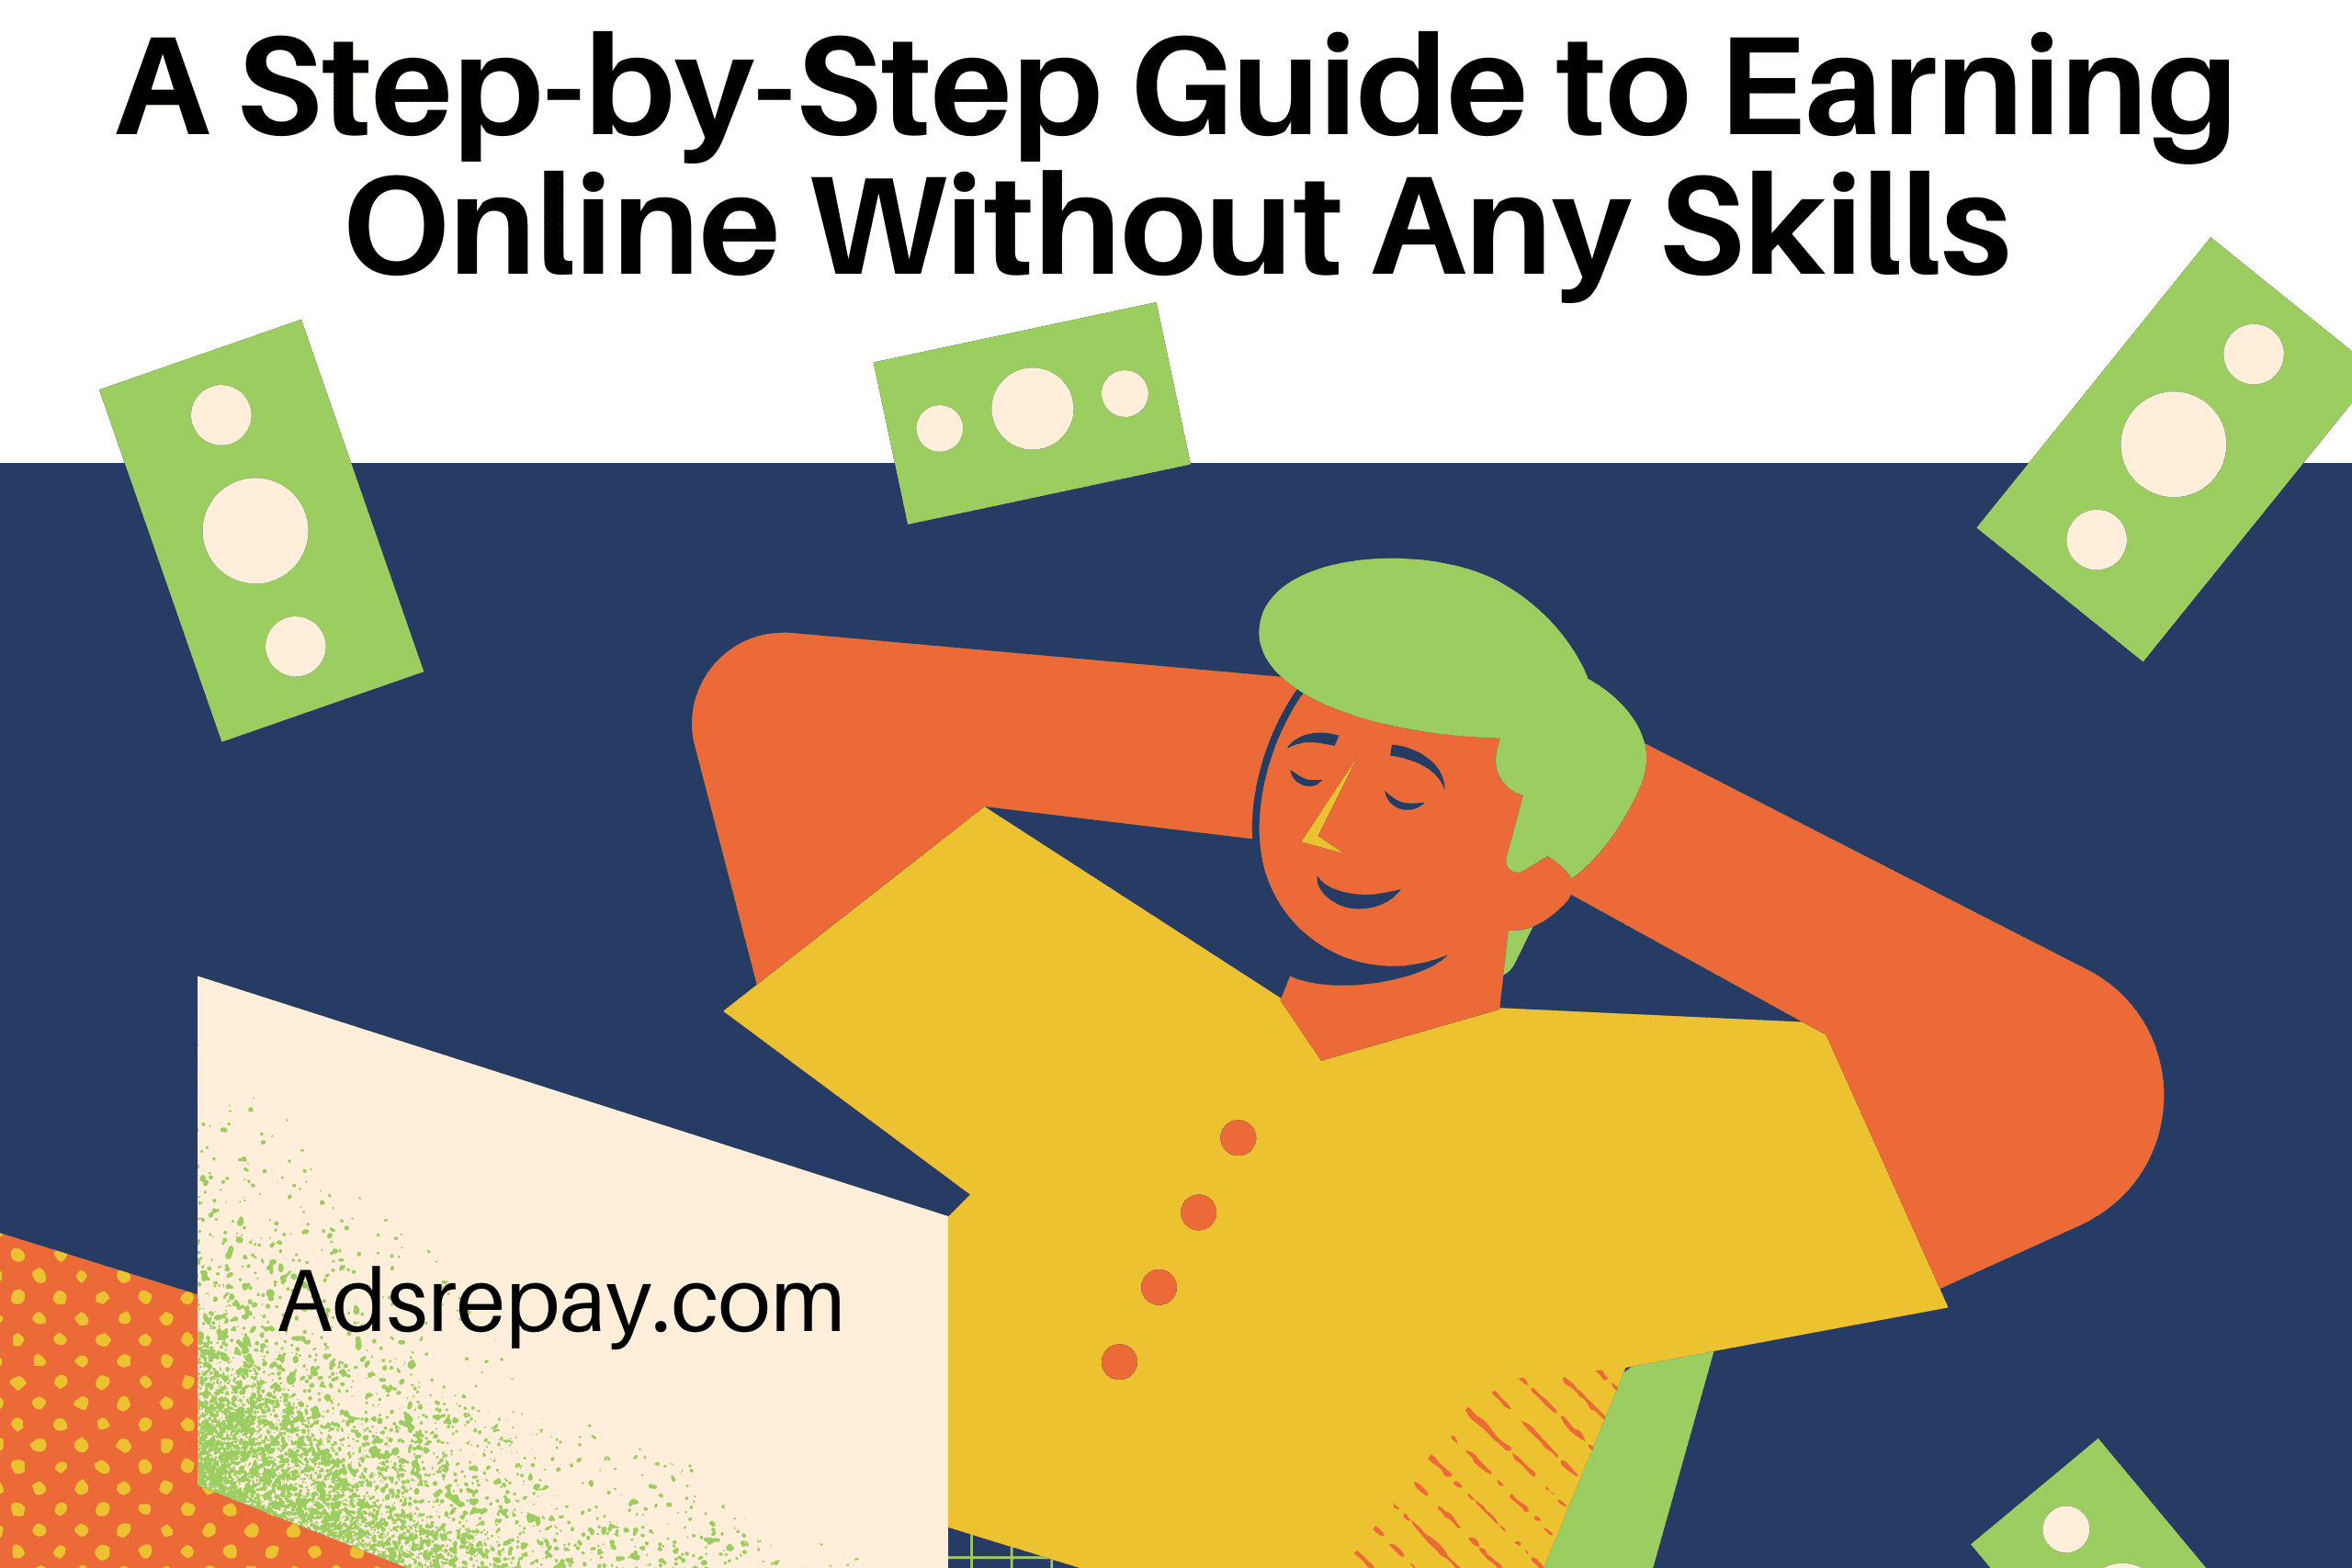 A Step-by-Step Guide to Earning Online Without Any Skills